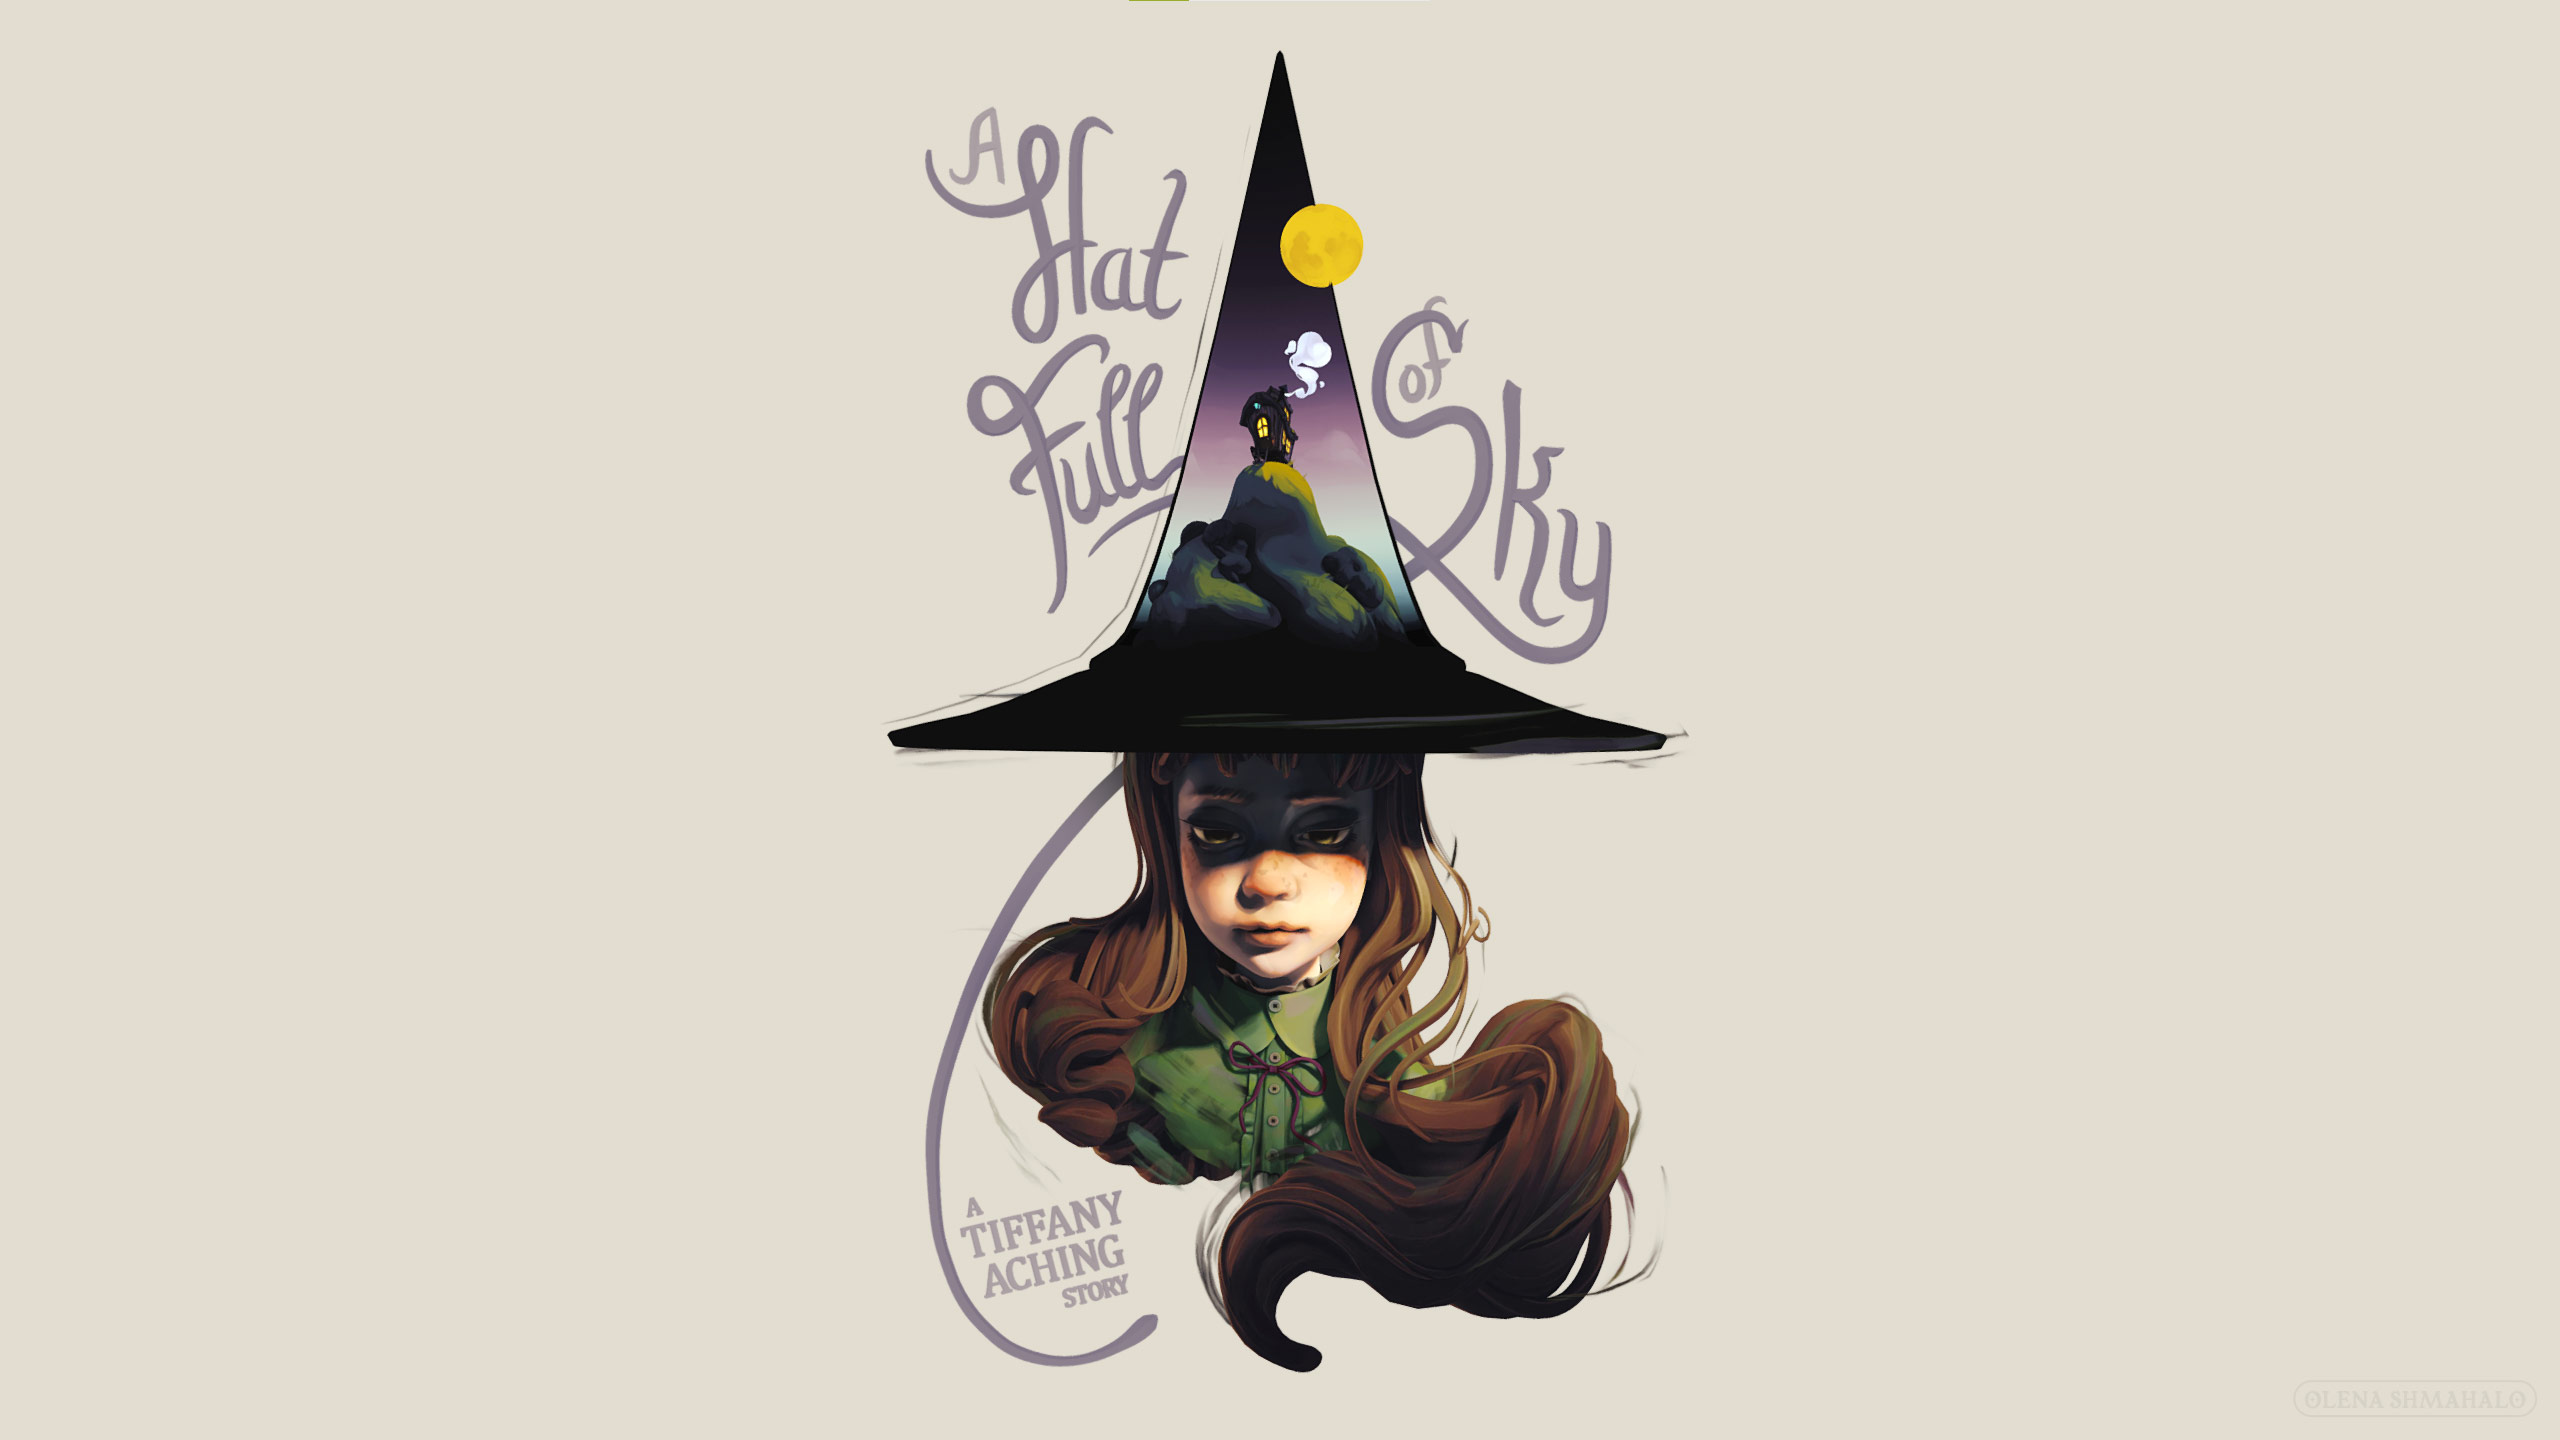 Painted 3D sculpture of a girl with brown hair wearing a witch hat. The top of the hat is a cutaway diorama of a landscape: a shepherd's hut on a hill. Hand-lettering around the girl says 